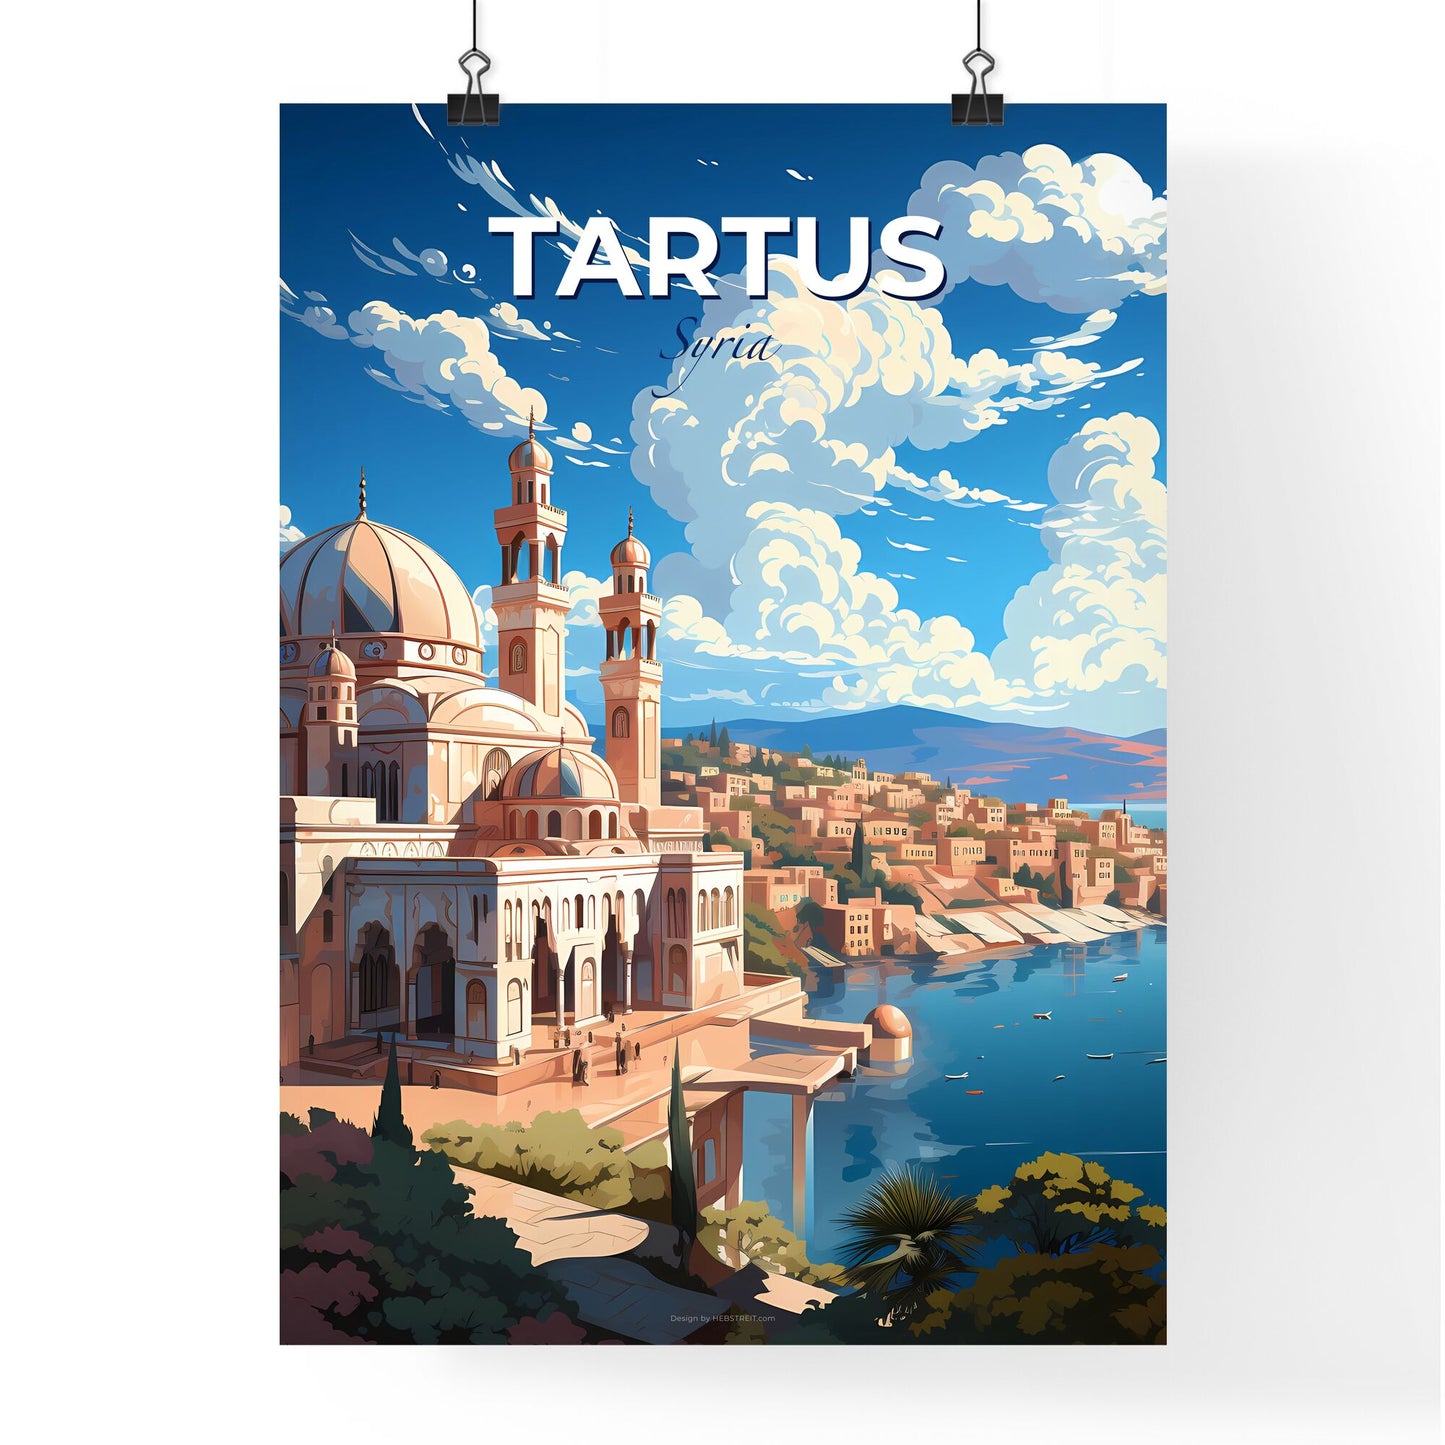 Tartus Syria Skyline Painting - Vibrant Colorful Artwork with Building Dome Towers River Default Title